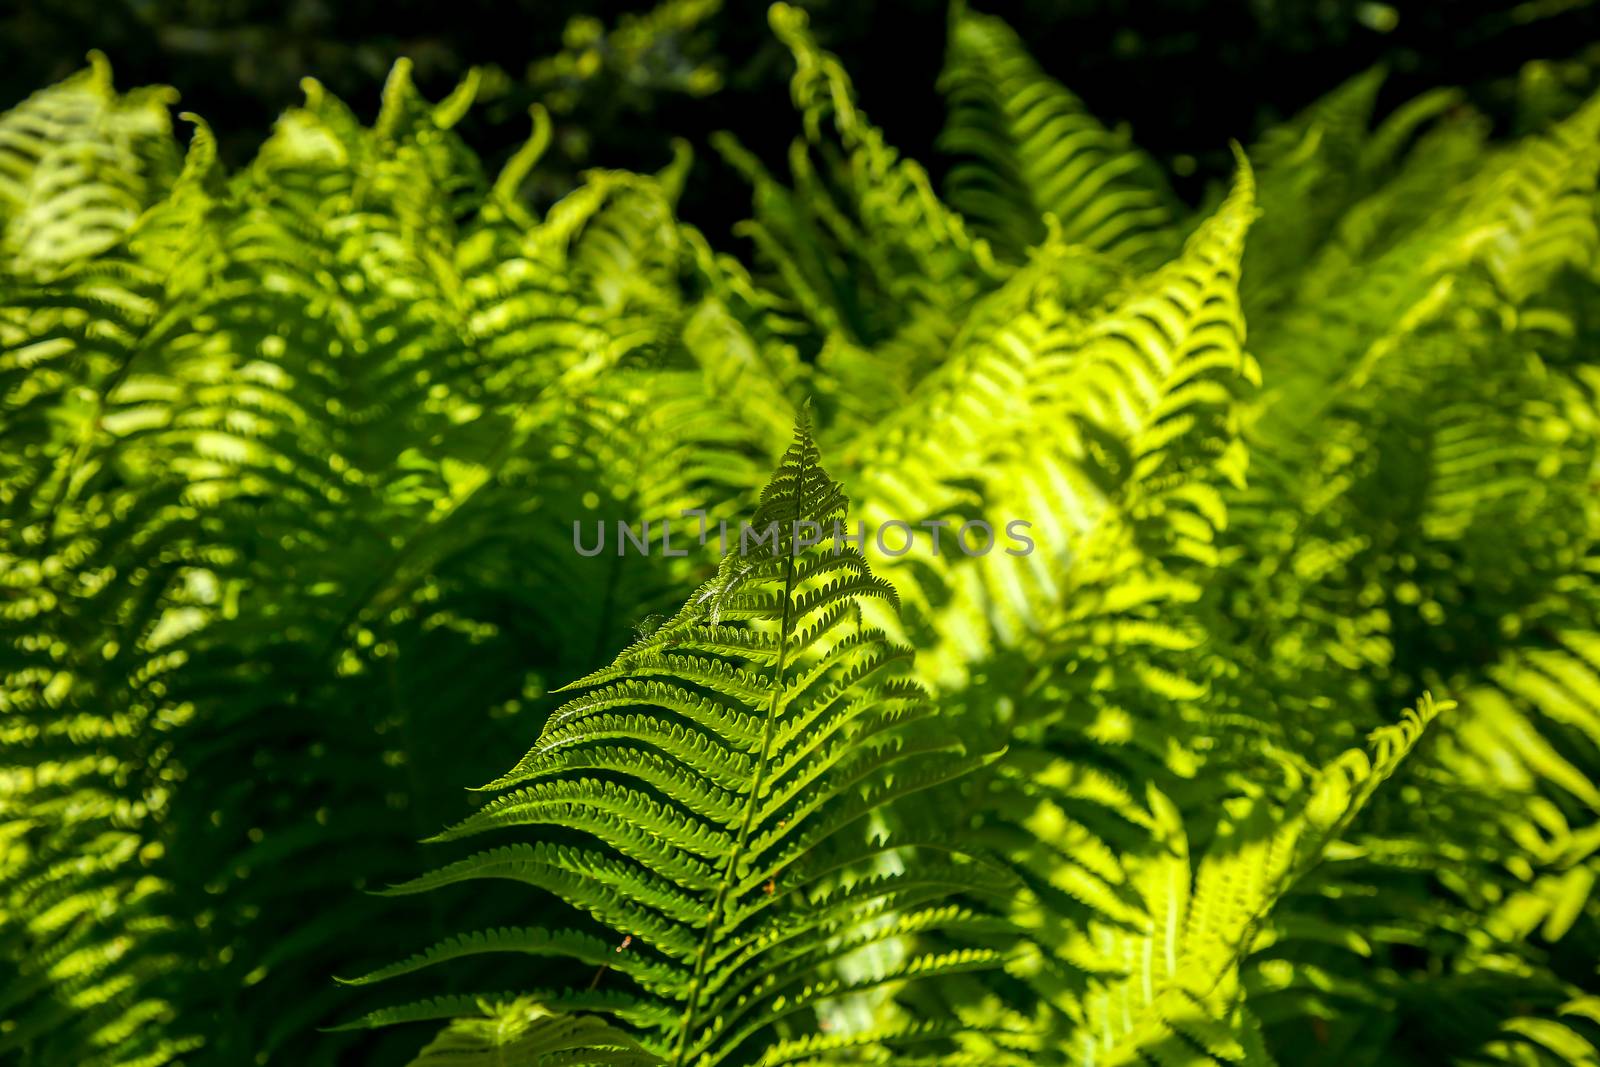 Ferns in the forest, Latvia. Beautyful ferns leaves green foliage. Close up of beautiful growing ferns in the forest. Natural floral fern background in sunlight. Green fern leaves perfect as background.

